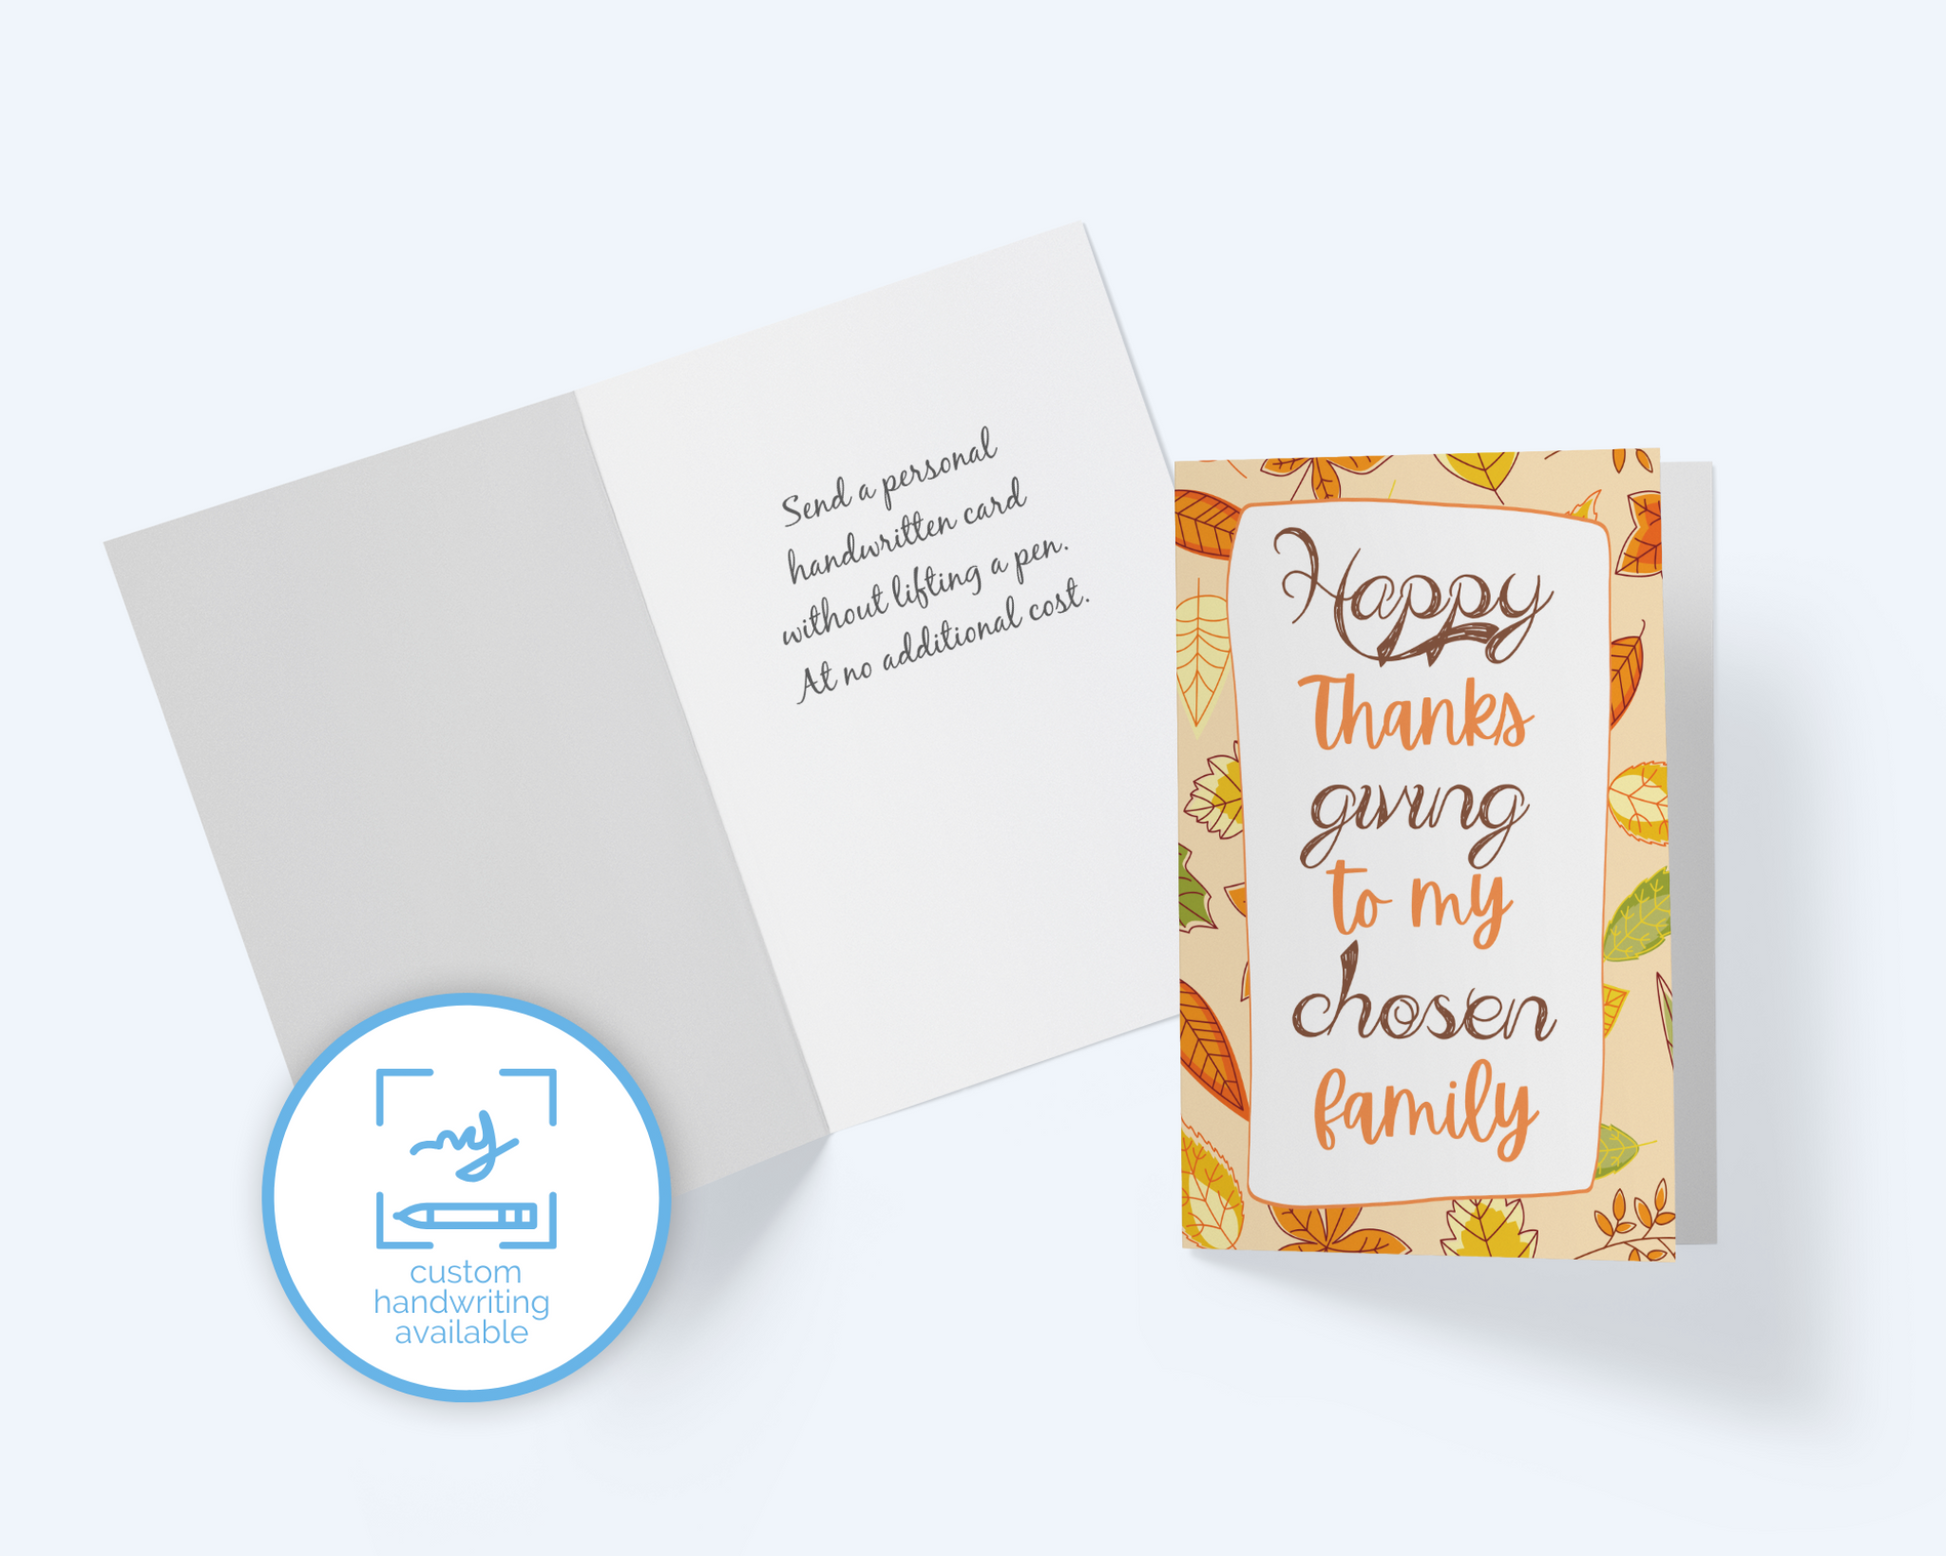 Chosen Family: Happy Thanksgiving Greeting card, Thanksgiving Note Card.